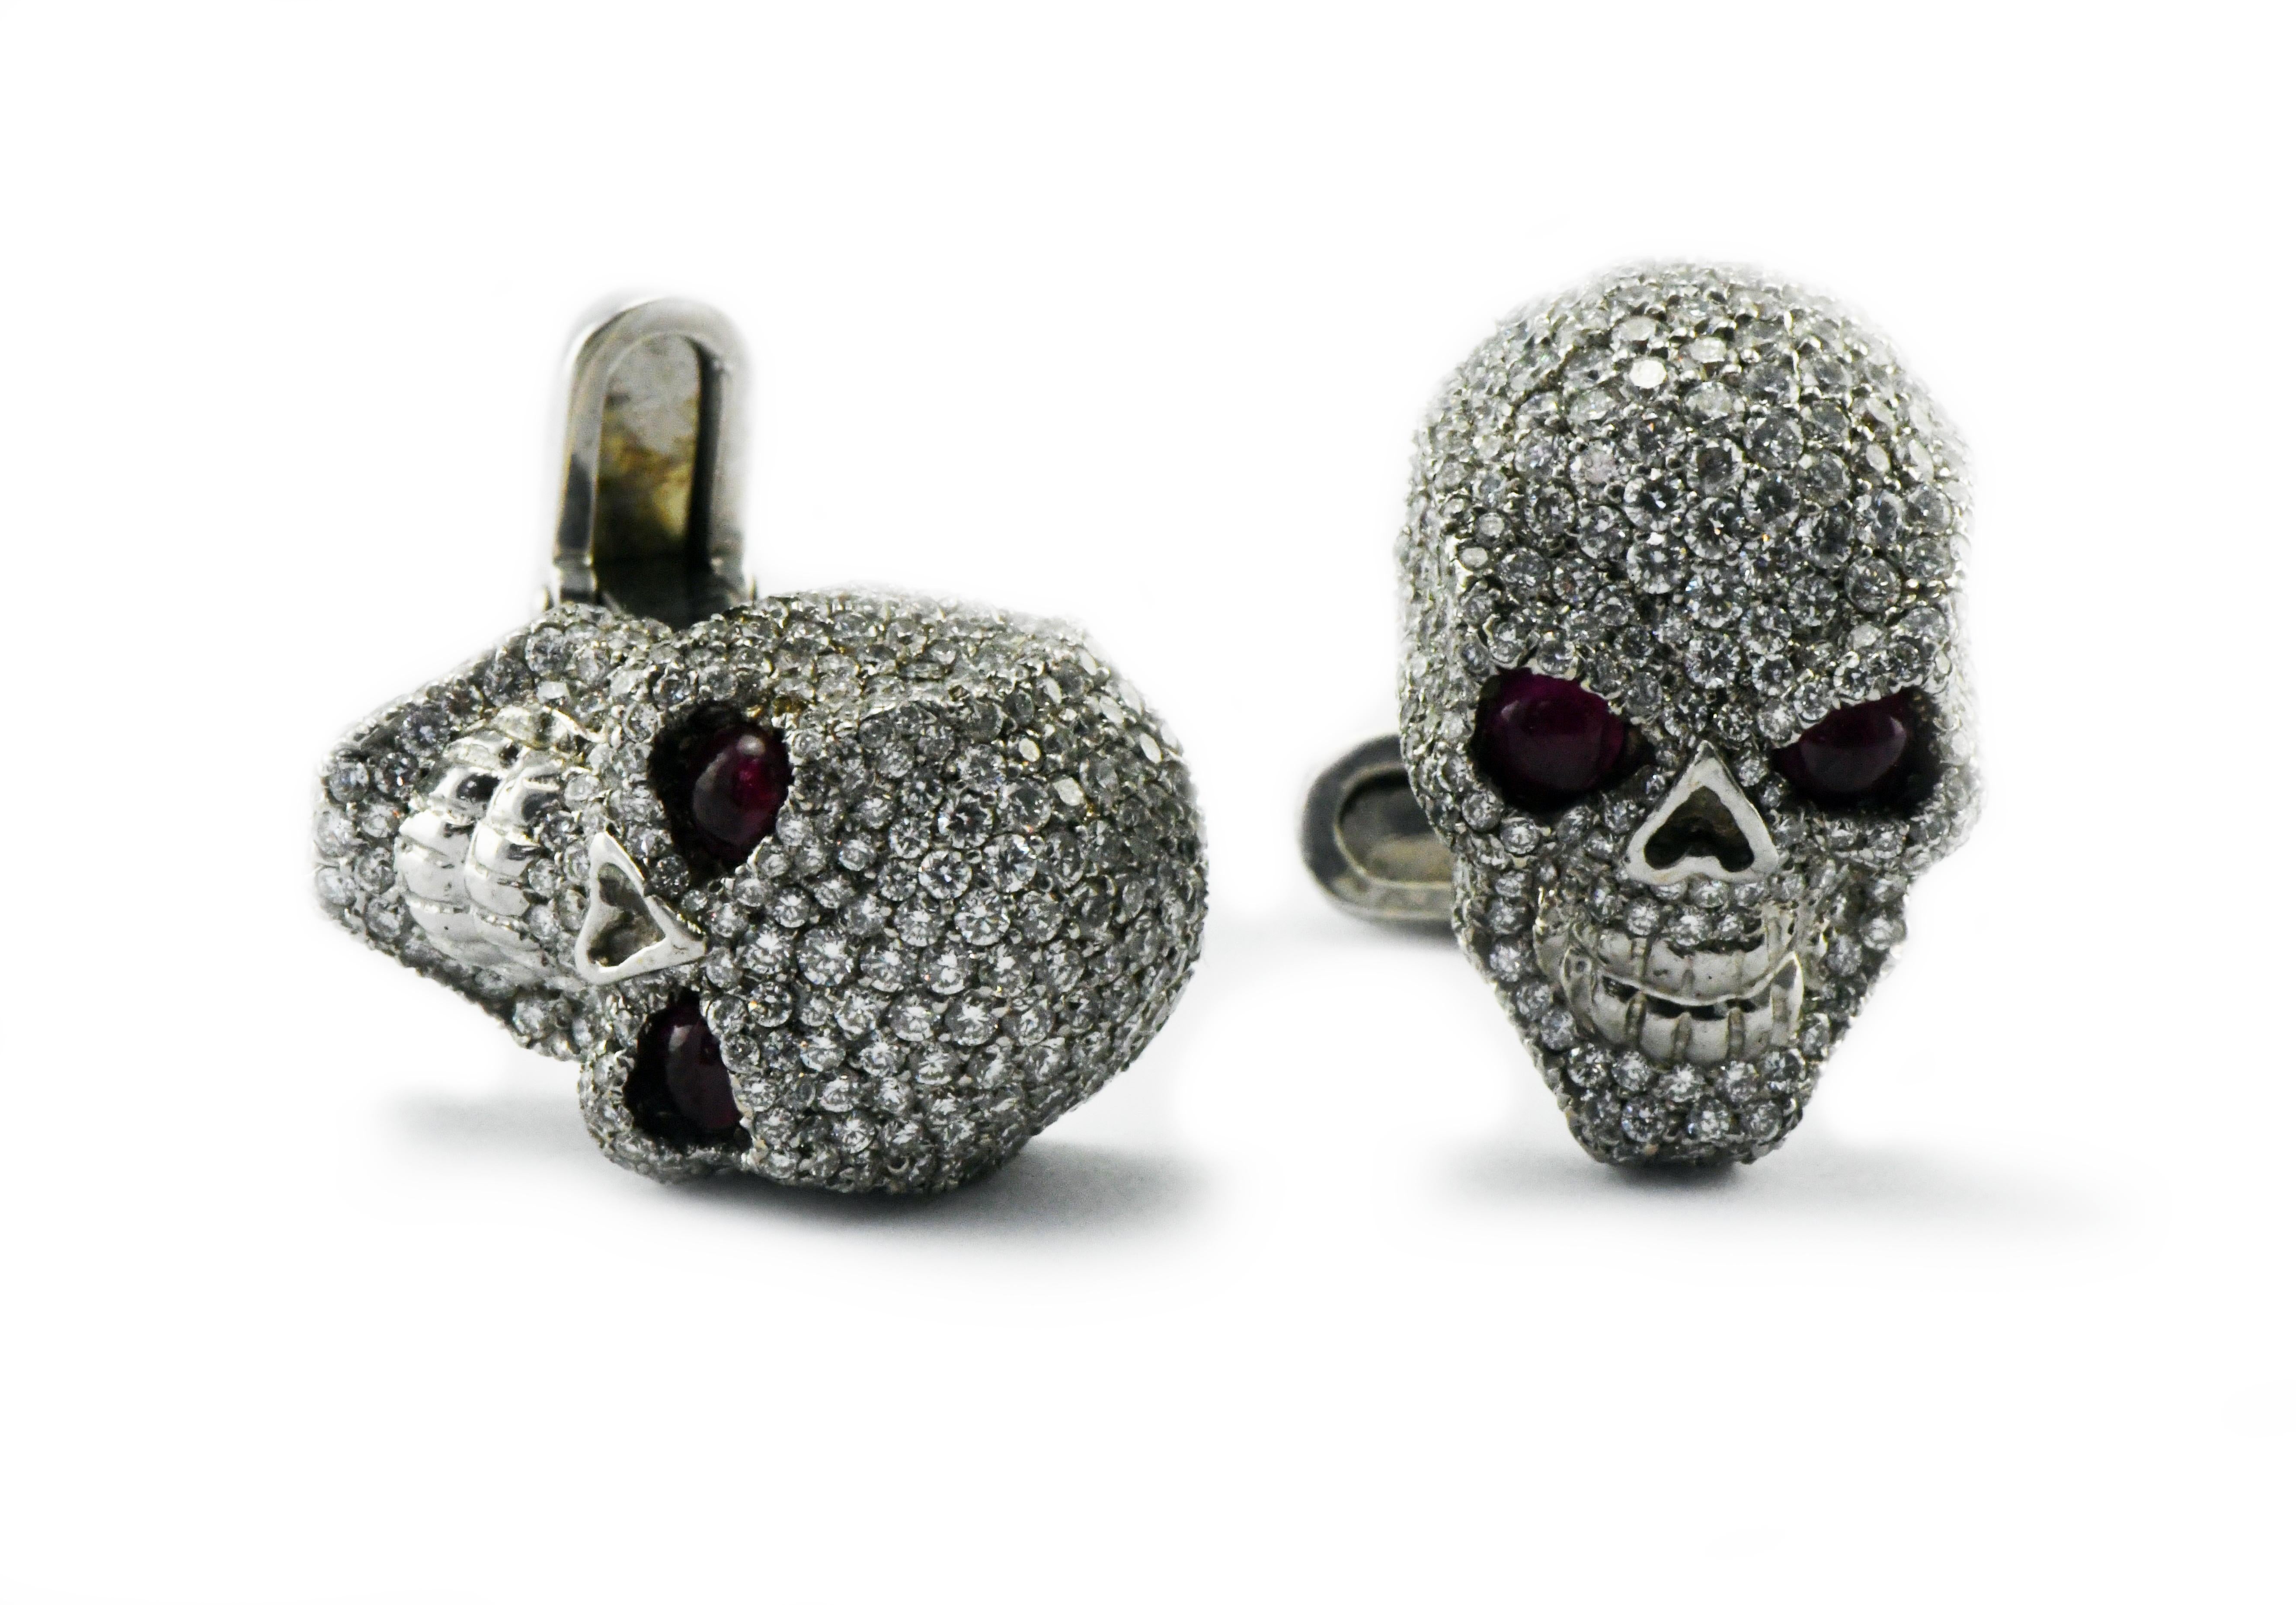 Neoclassical 18 Karat Solid Gold and 3.5 Carat Diamond Skull Cufflinks w/Ruby Eyes 23.8 Grams For Sale